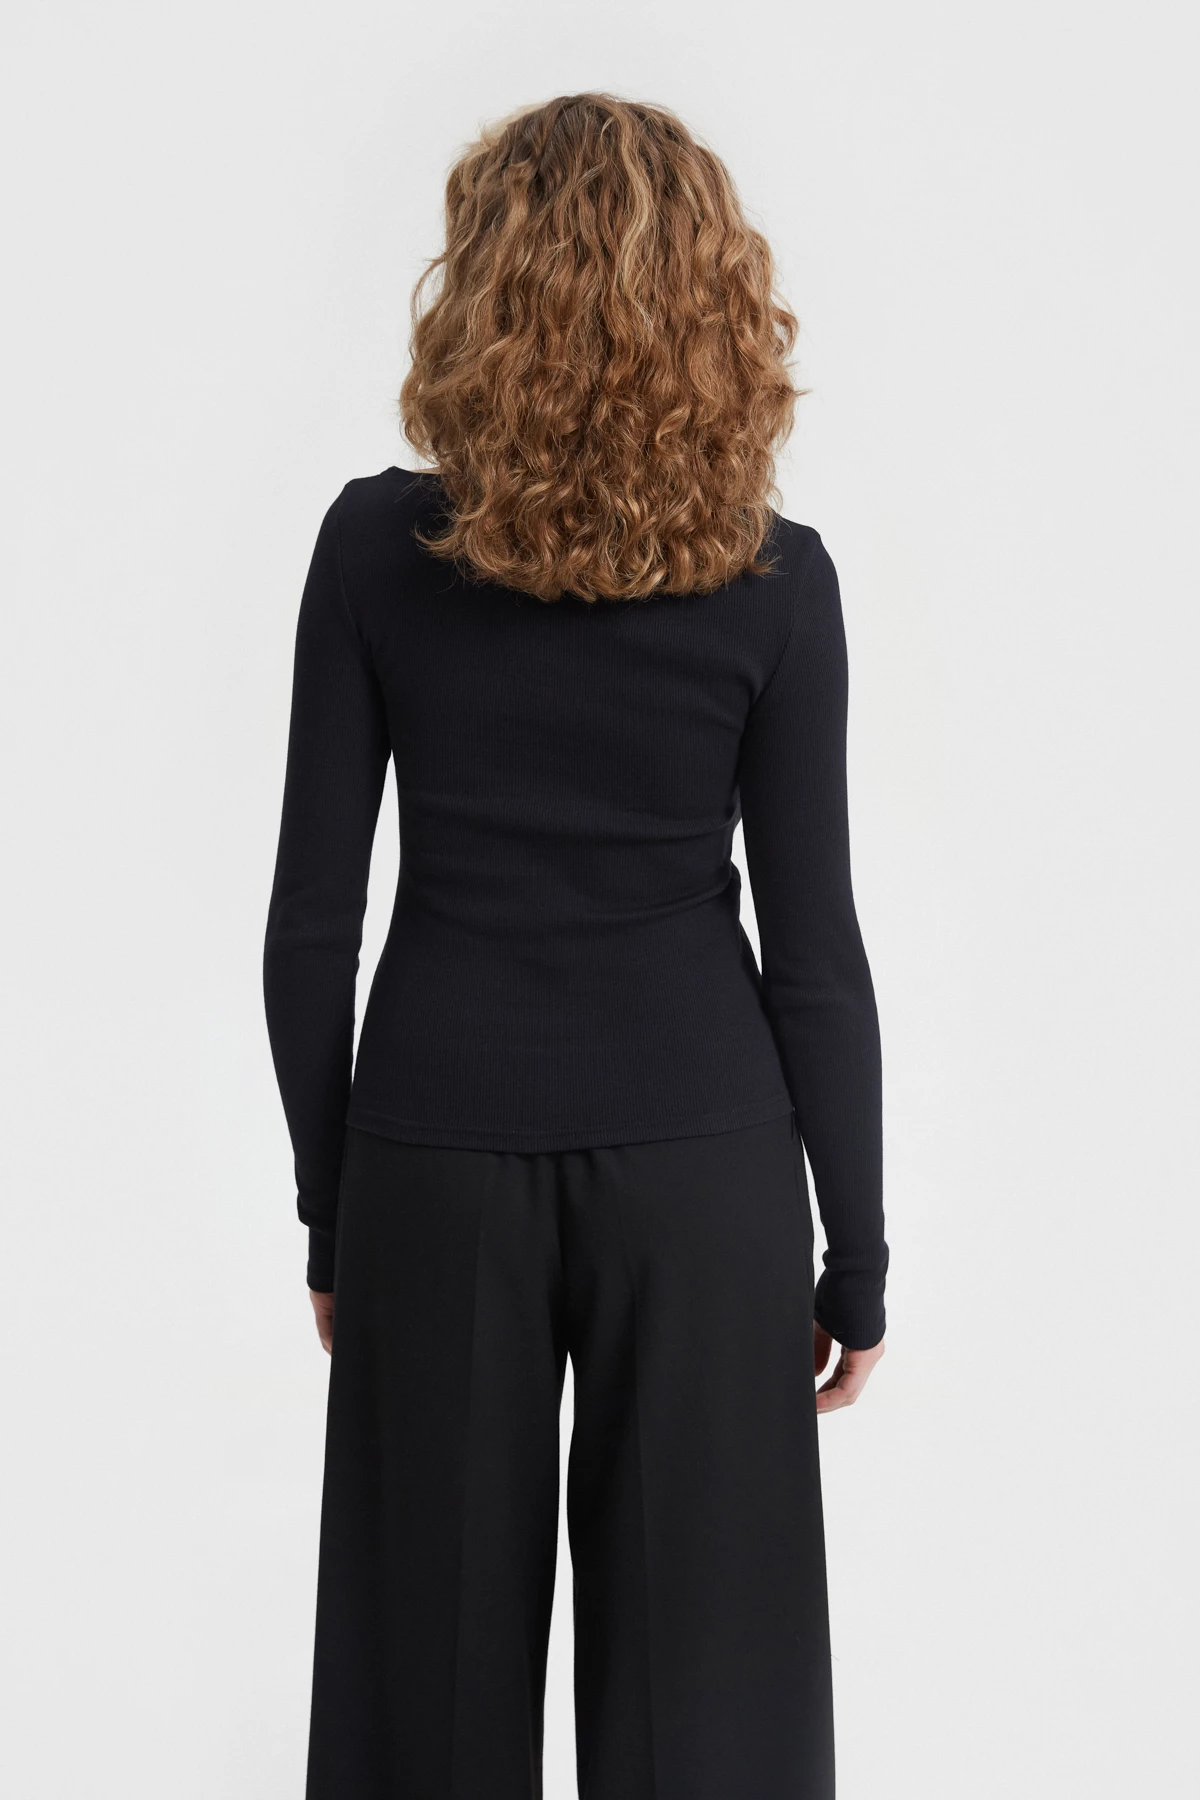 Black jersey jumper with figured neck, photo 3